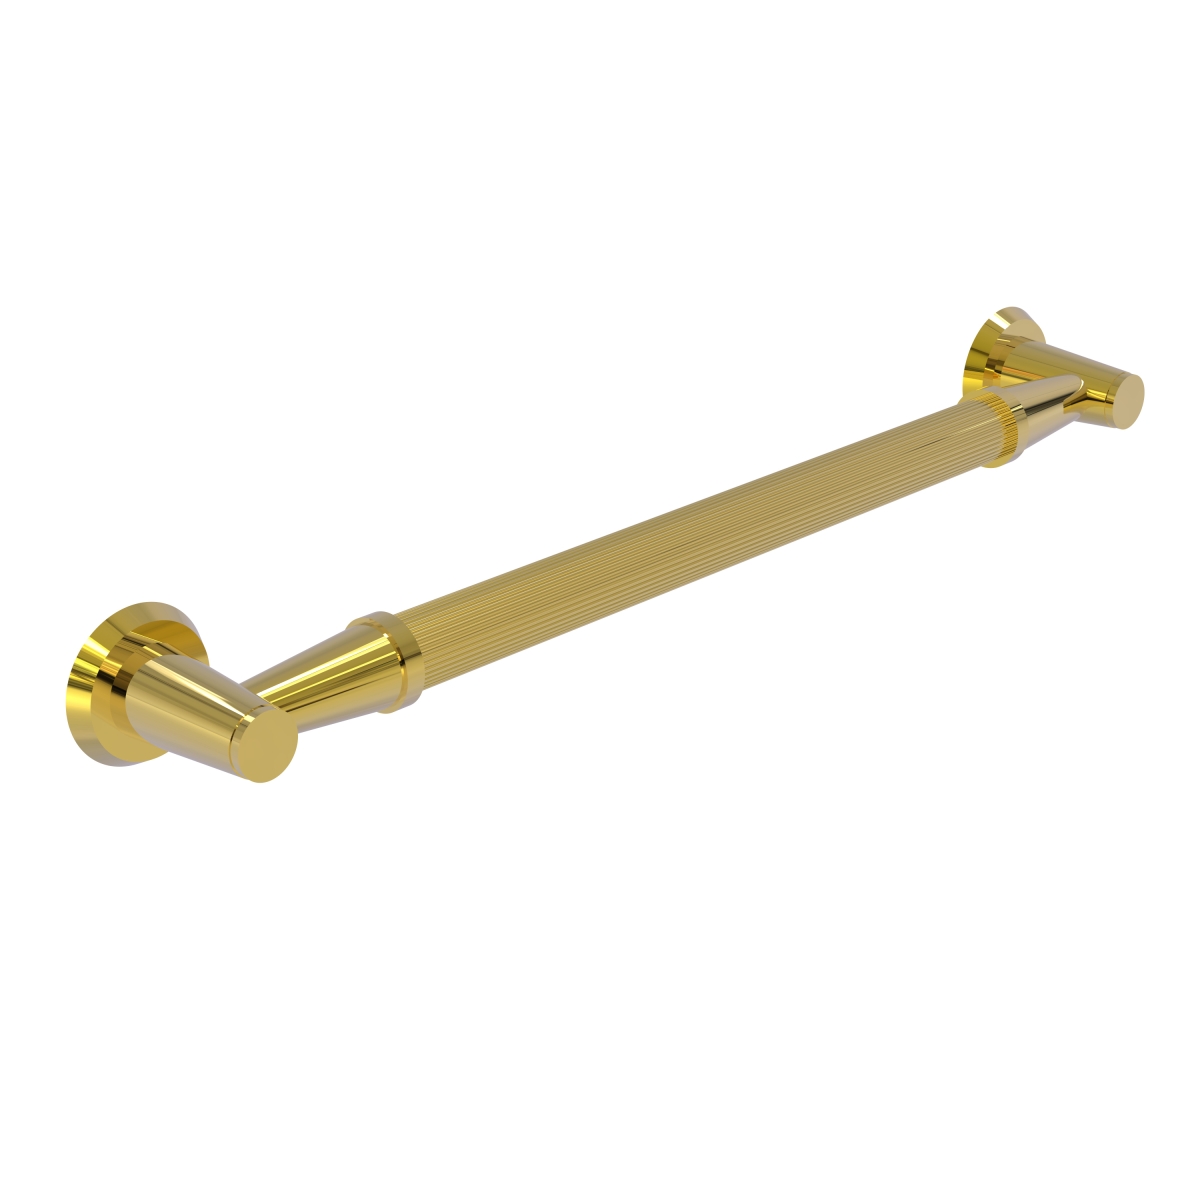 Picture of Allied Brass MD-GRR-24-UNL 24 in. Reeded Grab Bar, Unlacquered Brass